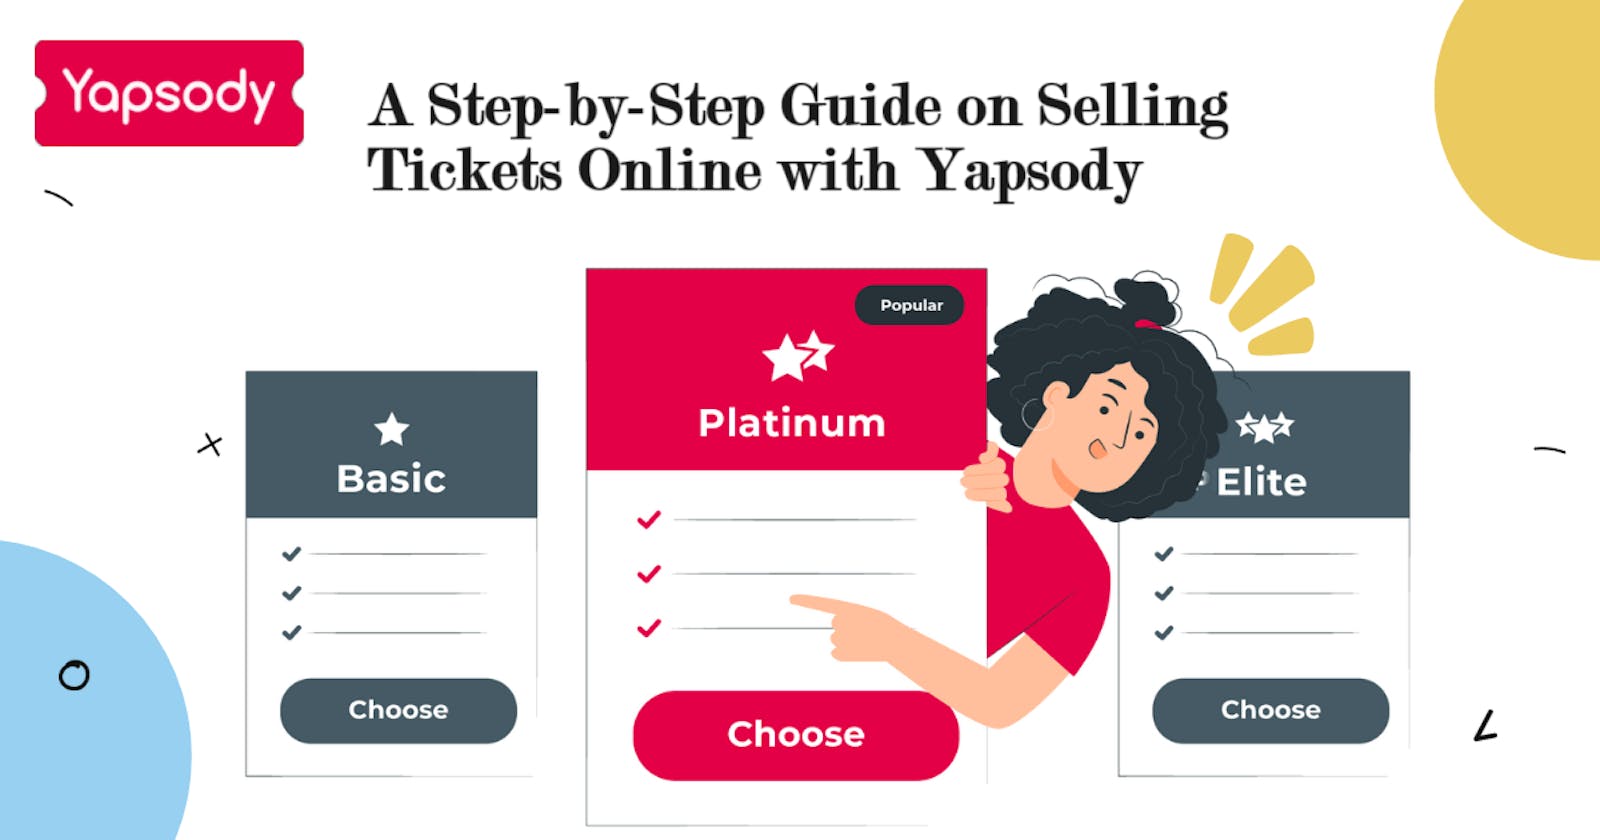 A Step-by-Step Guide on Selling Tickets Online with Yapsody